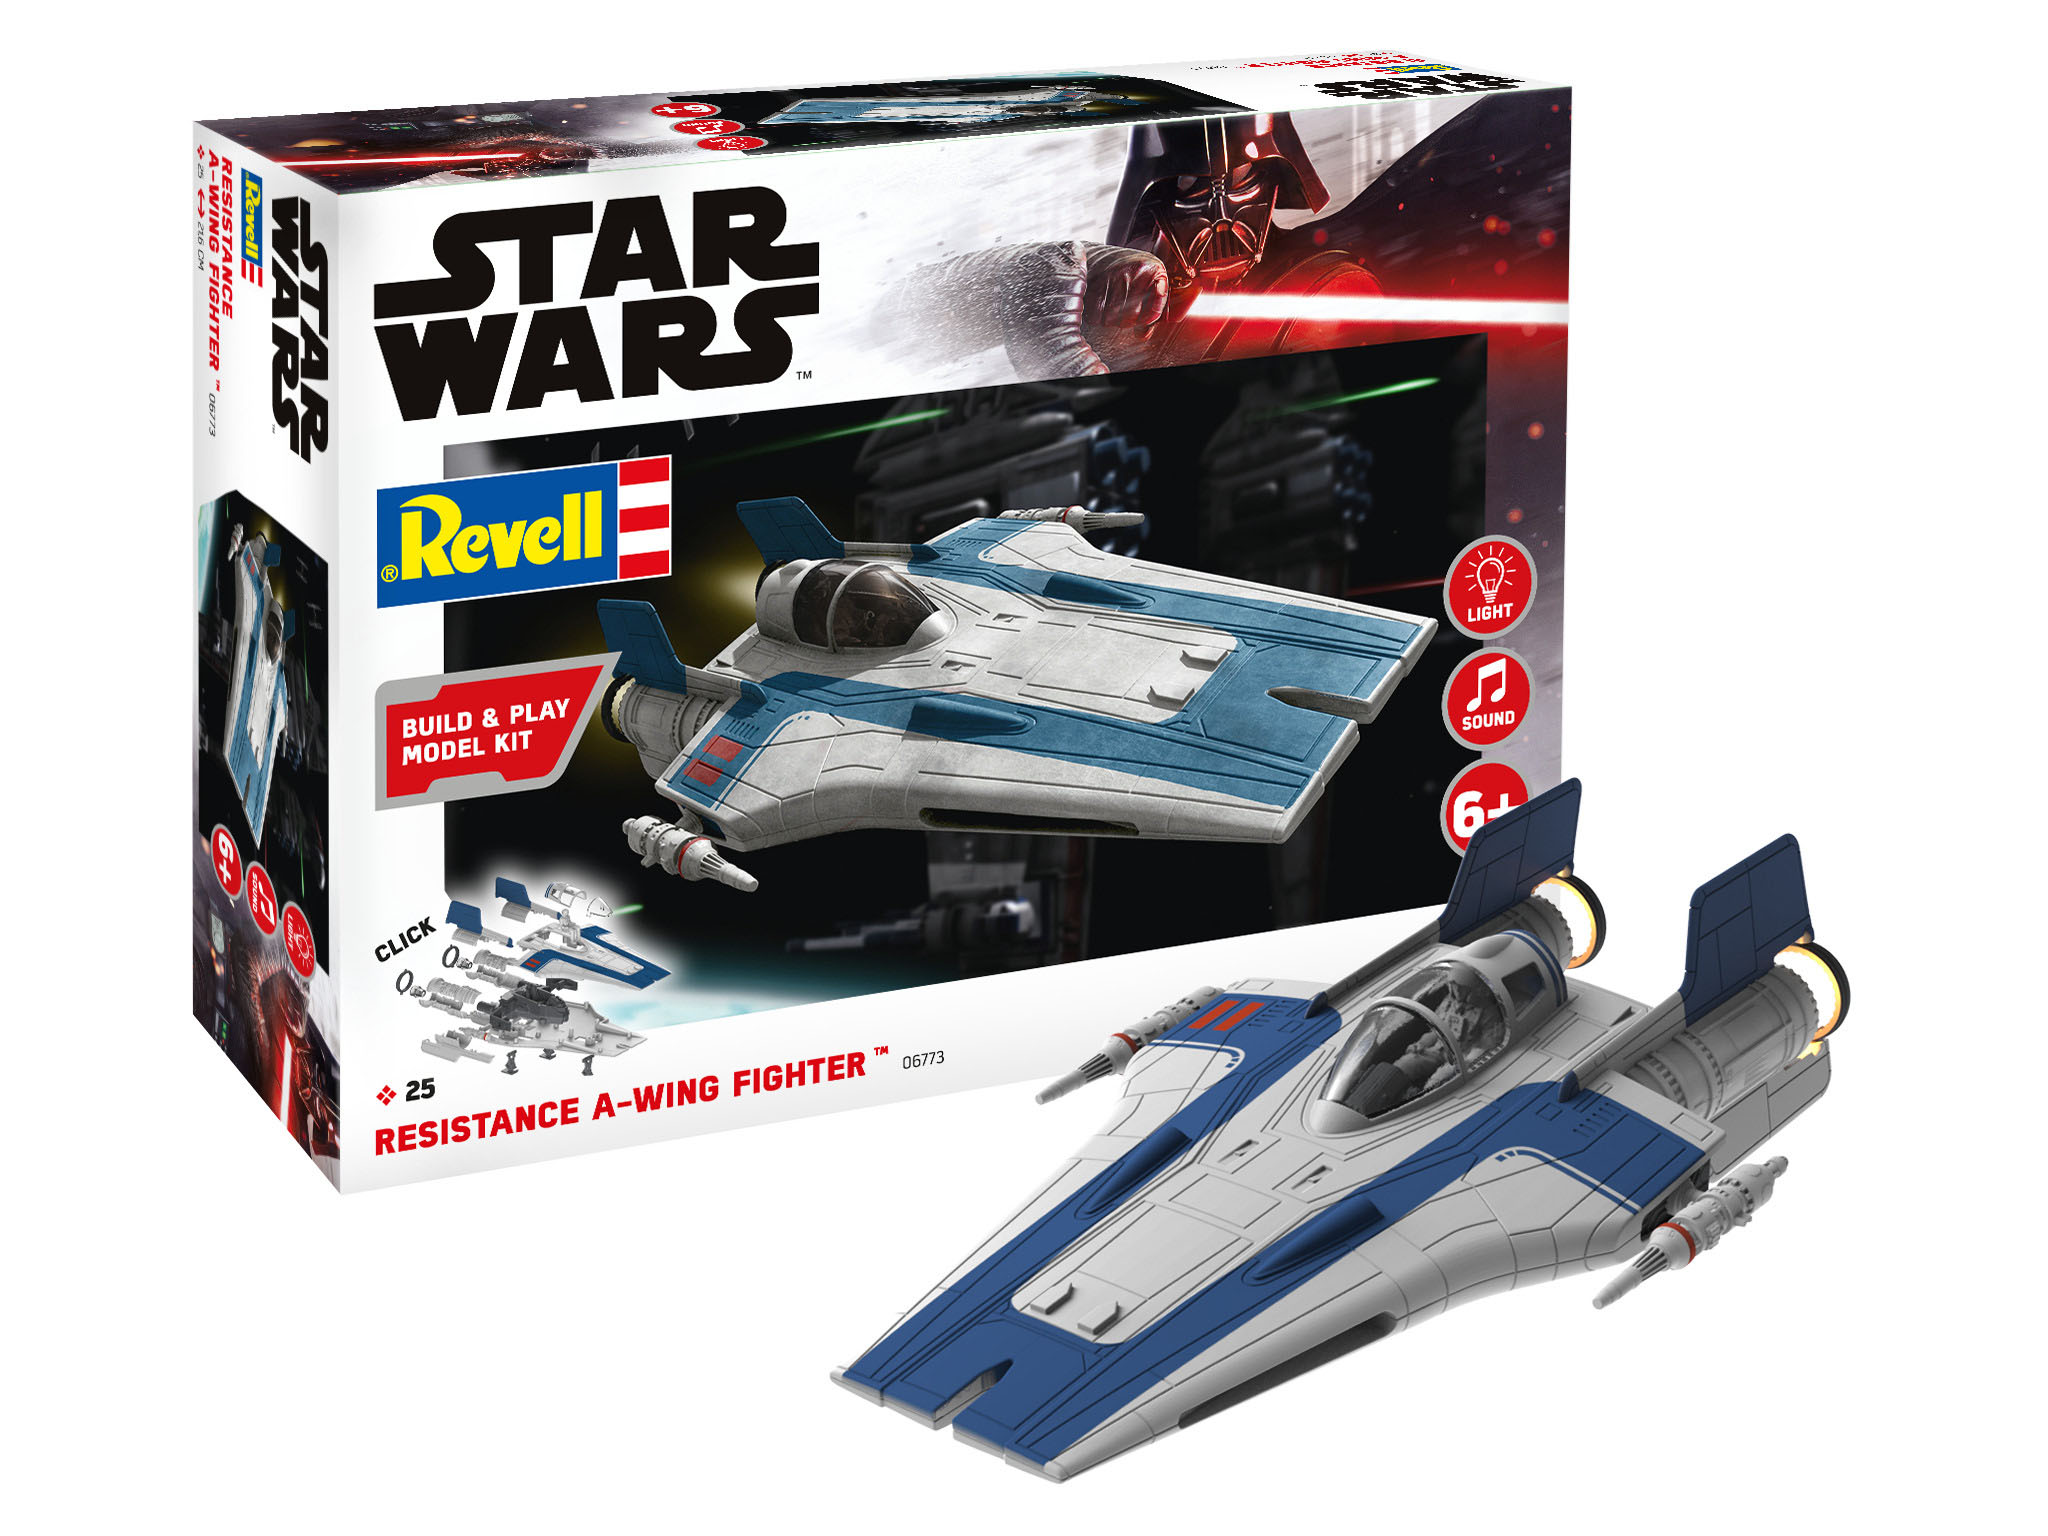 Revell Star Wars Resistance A-wing Fighter blue 1:44 bouwpakket easy click systeem